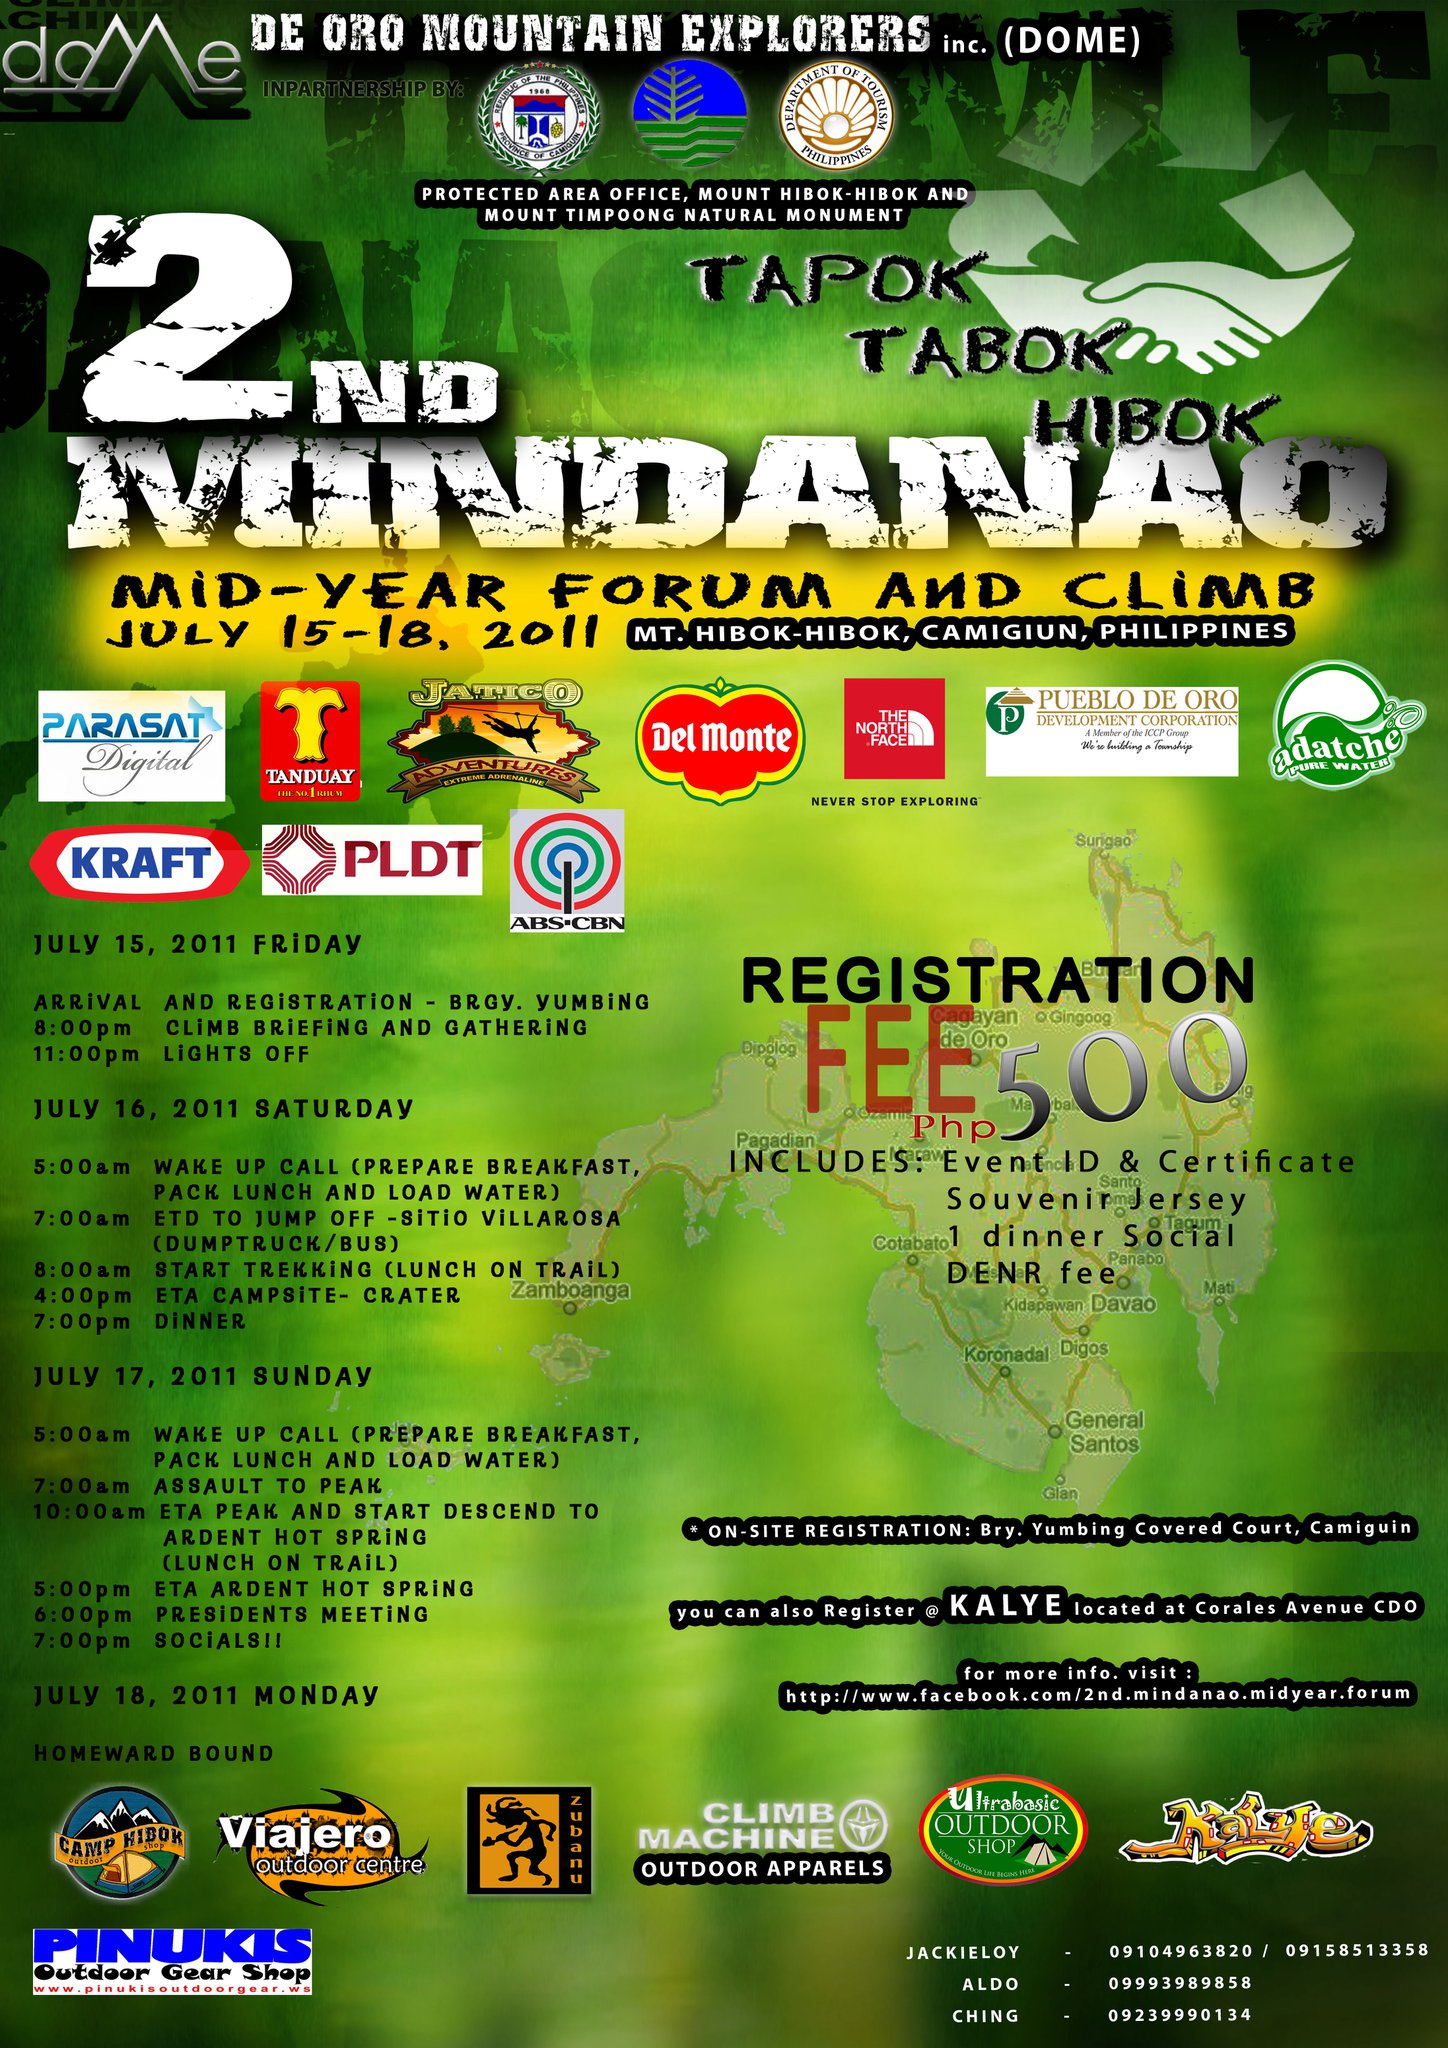 DOME 2nd Mindanao Mid-Year Forum and Climb in Camiguin